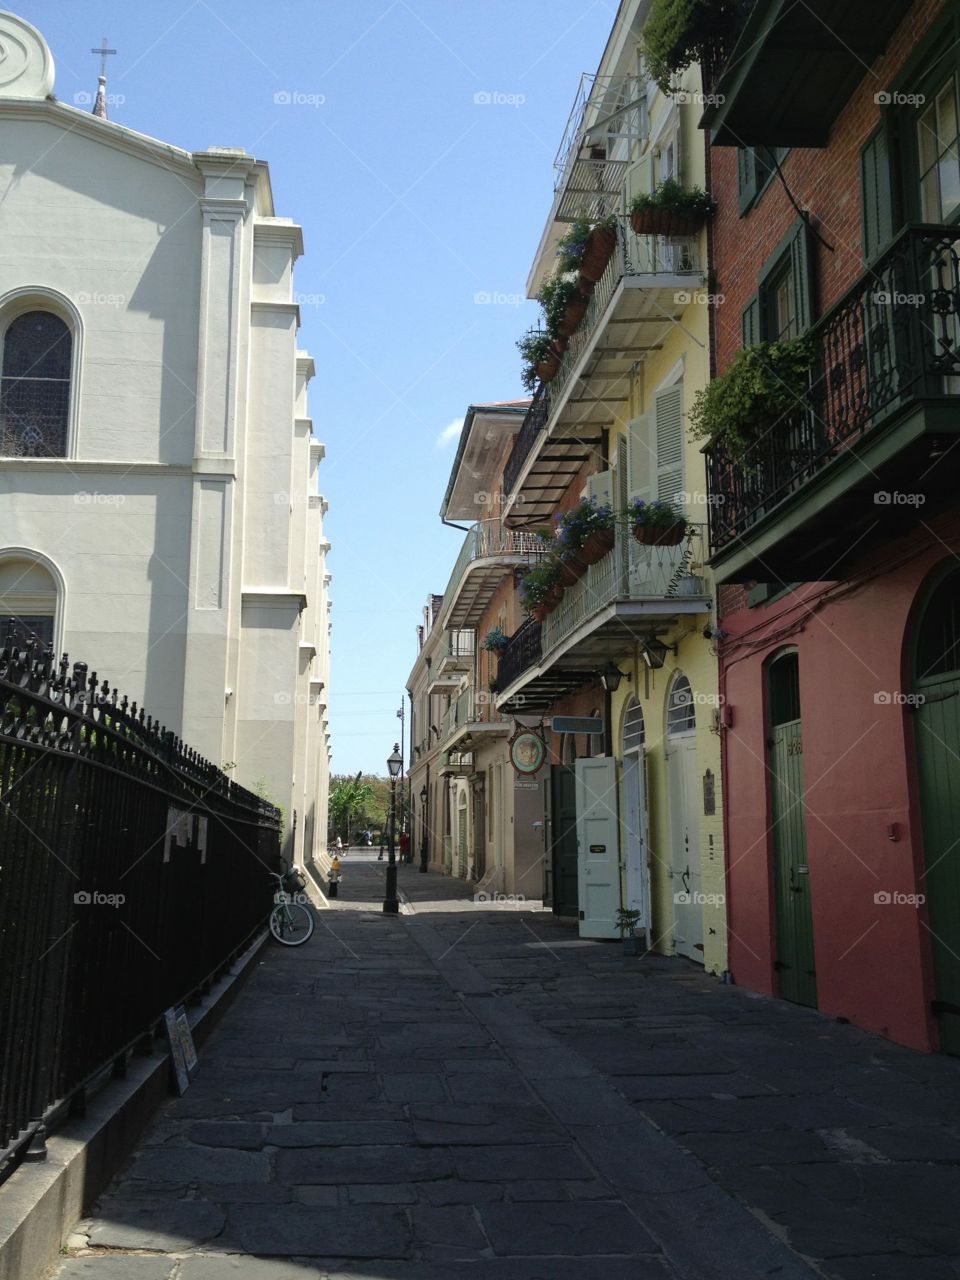 New Orleans French Quarter. Pirate's Alley